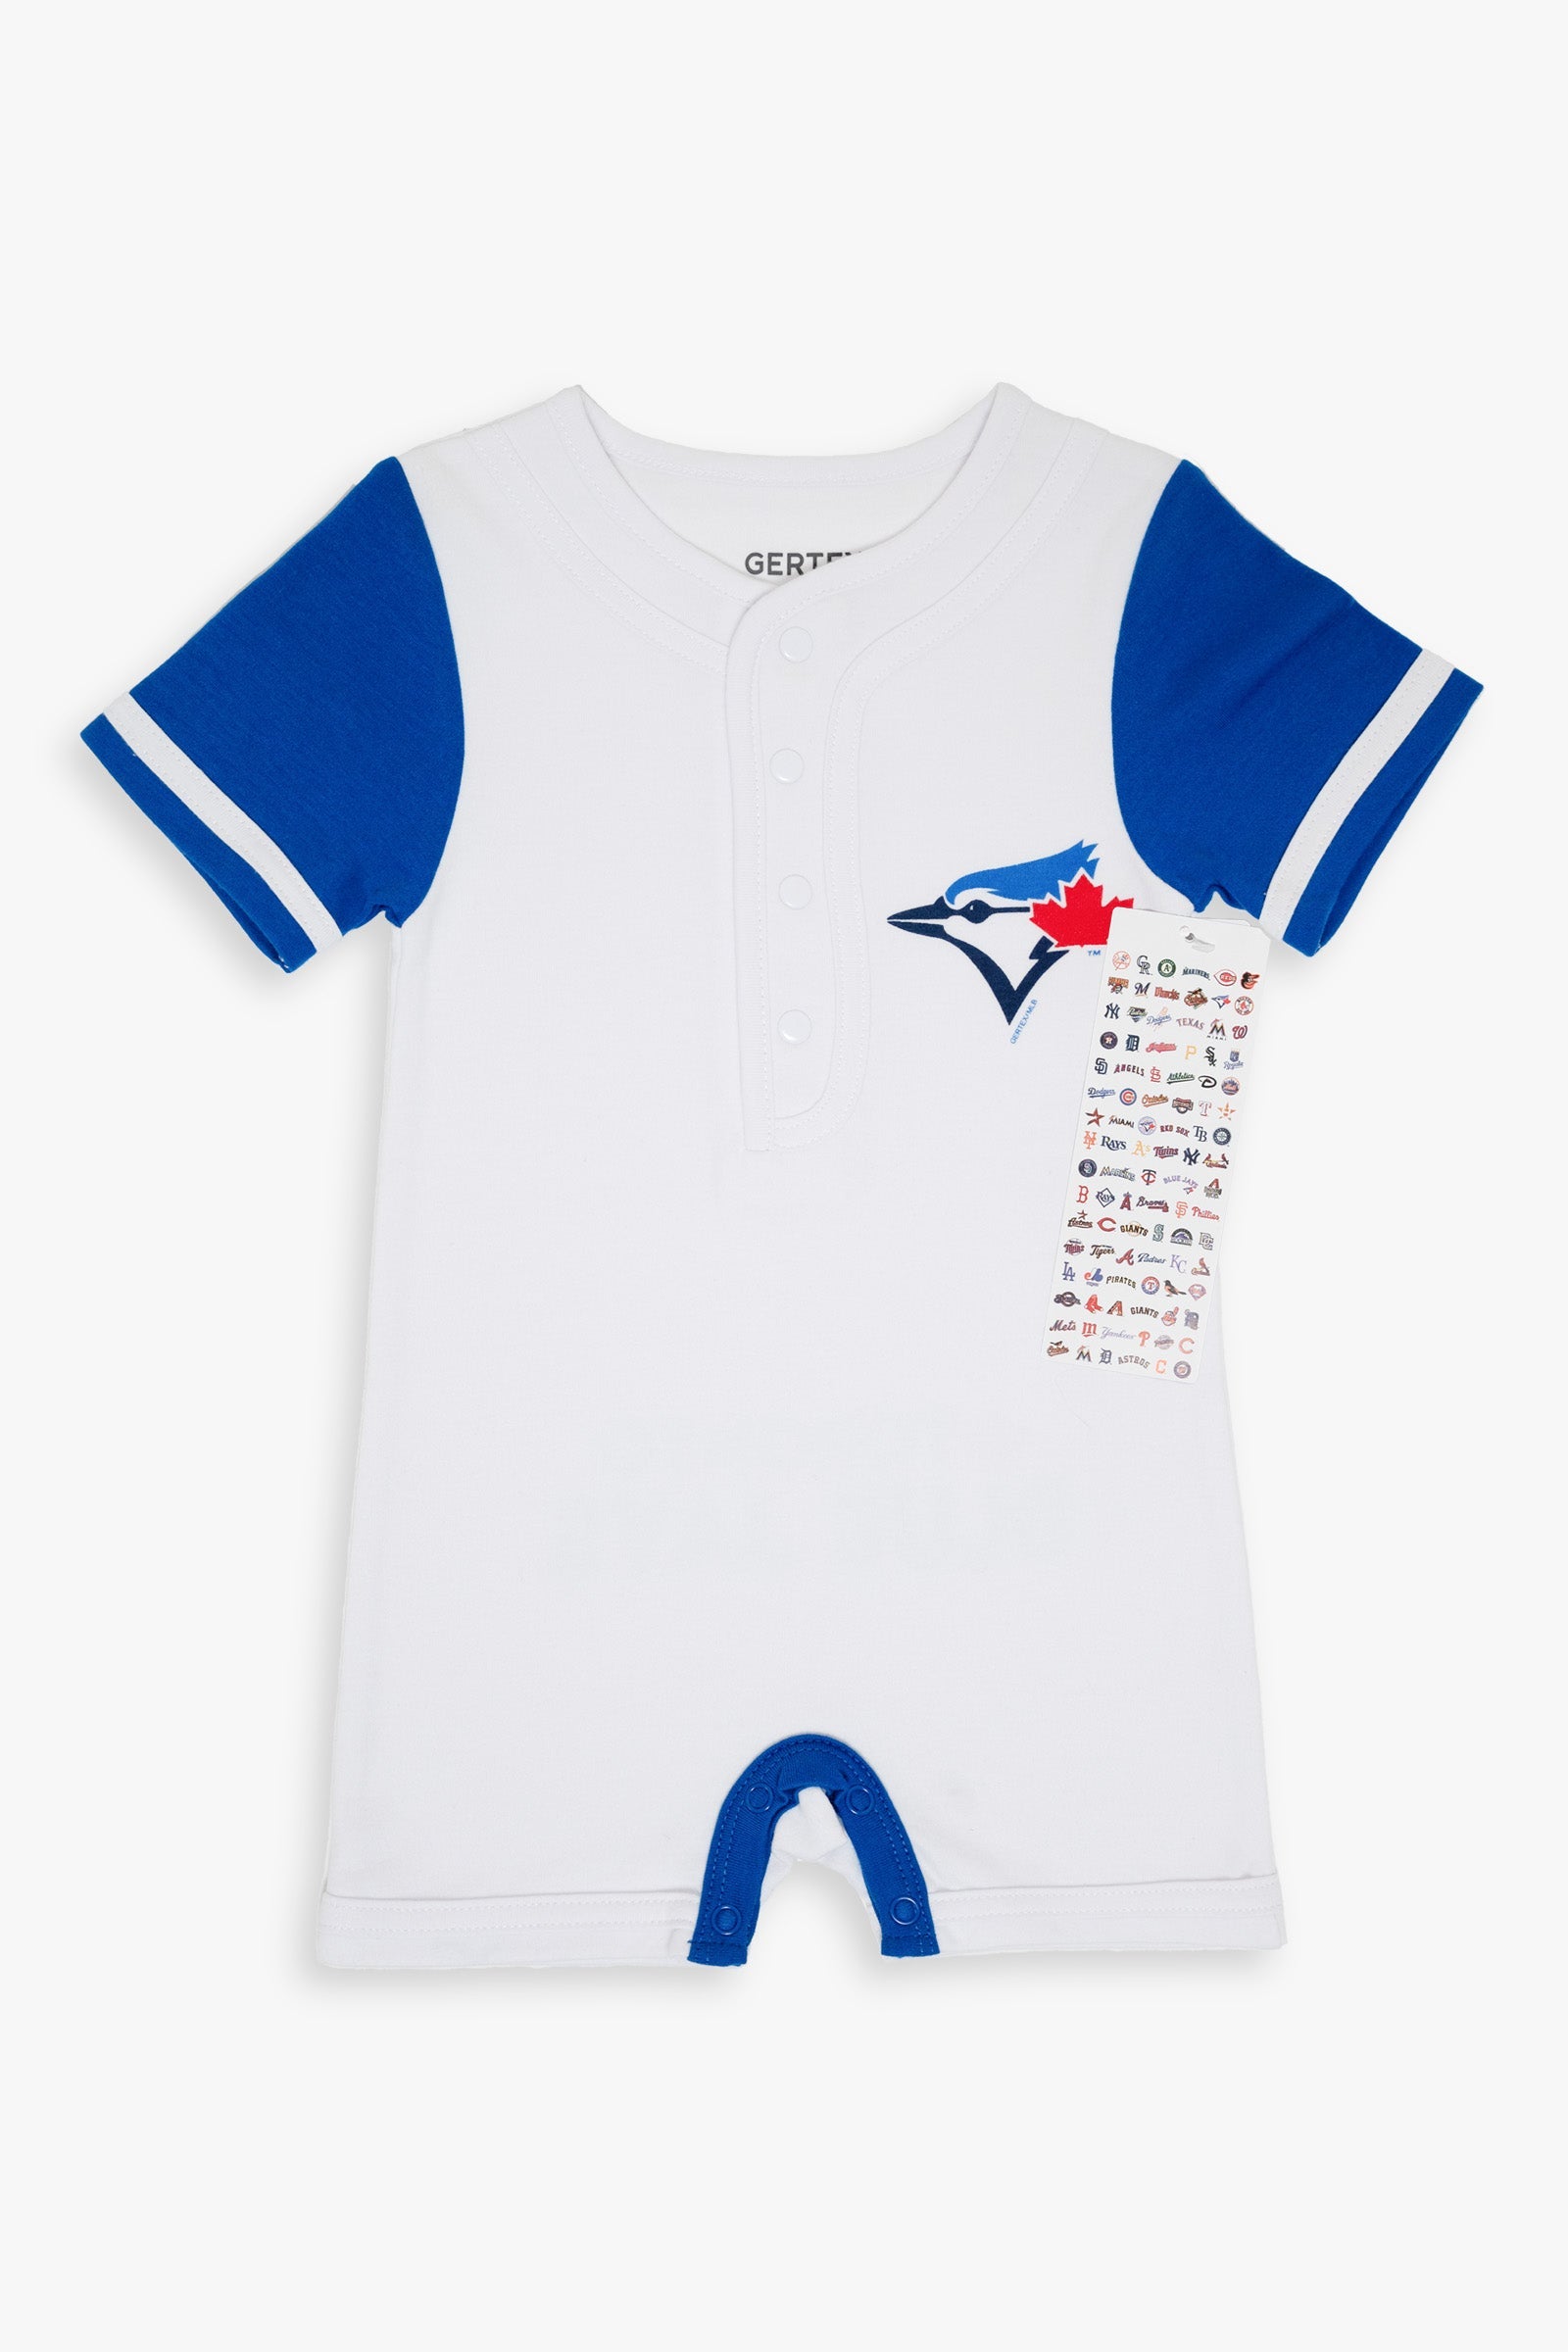 Blue Jays Morning Brew: Canadian Hall of Fame, Onesies, and more